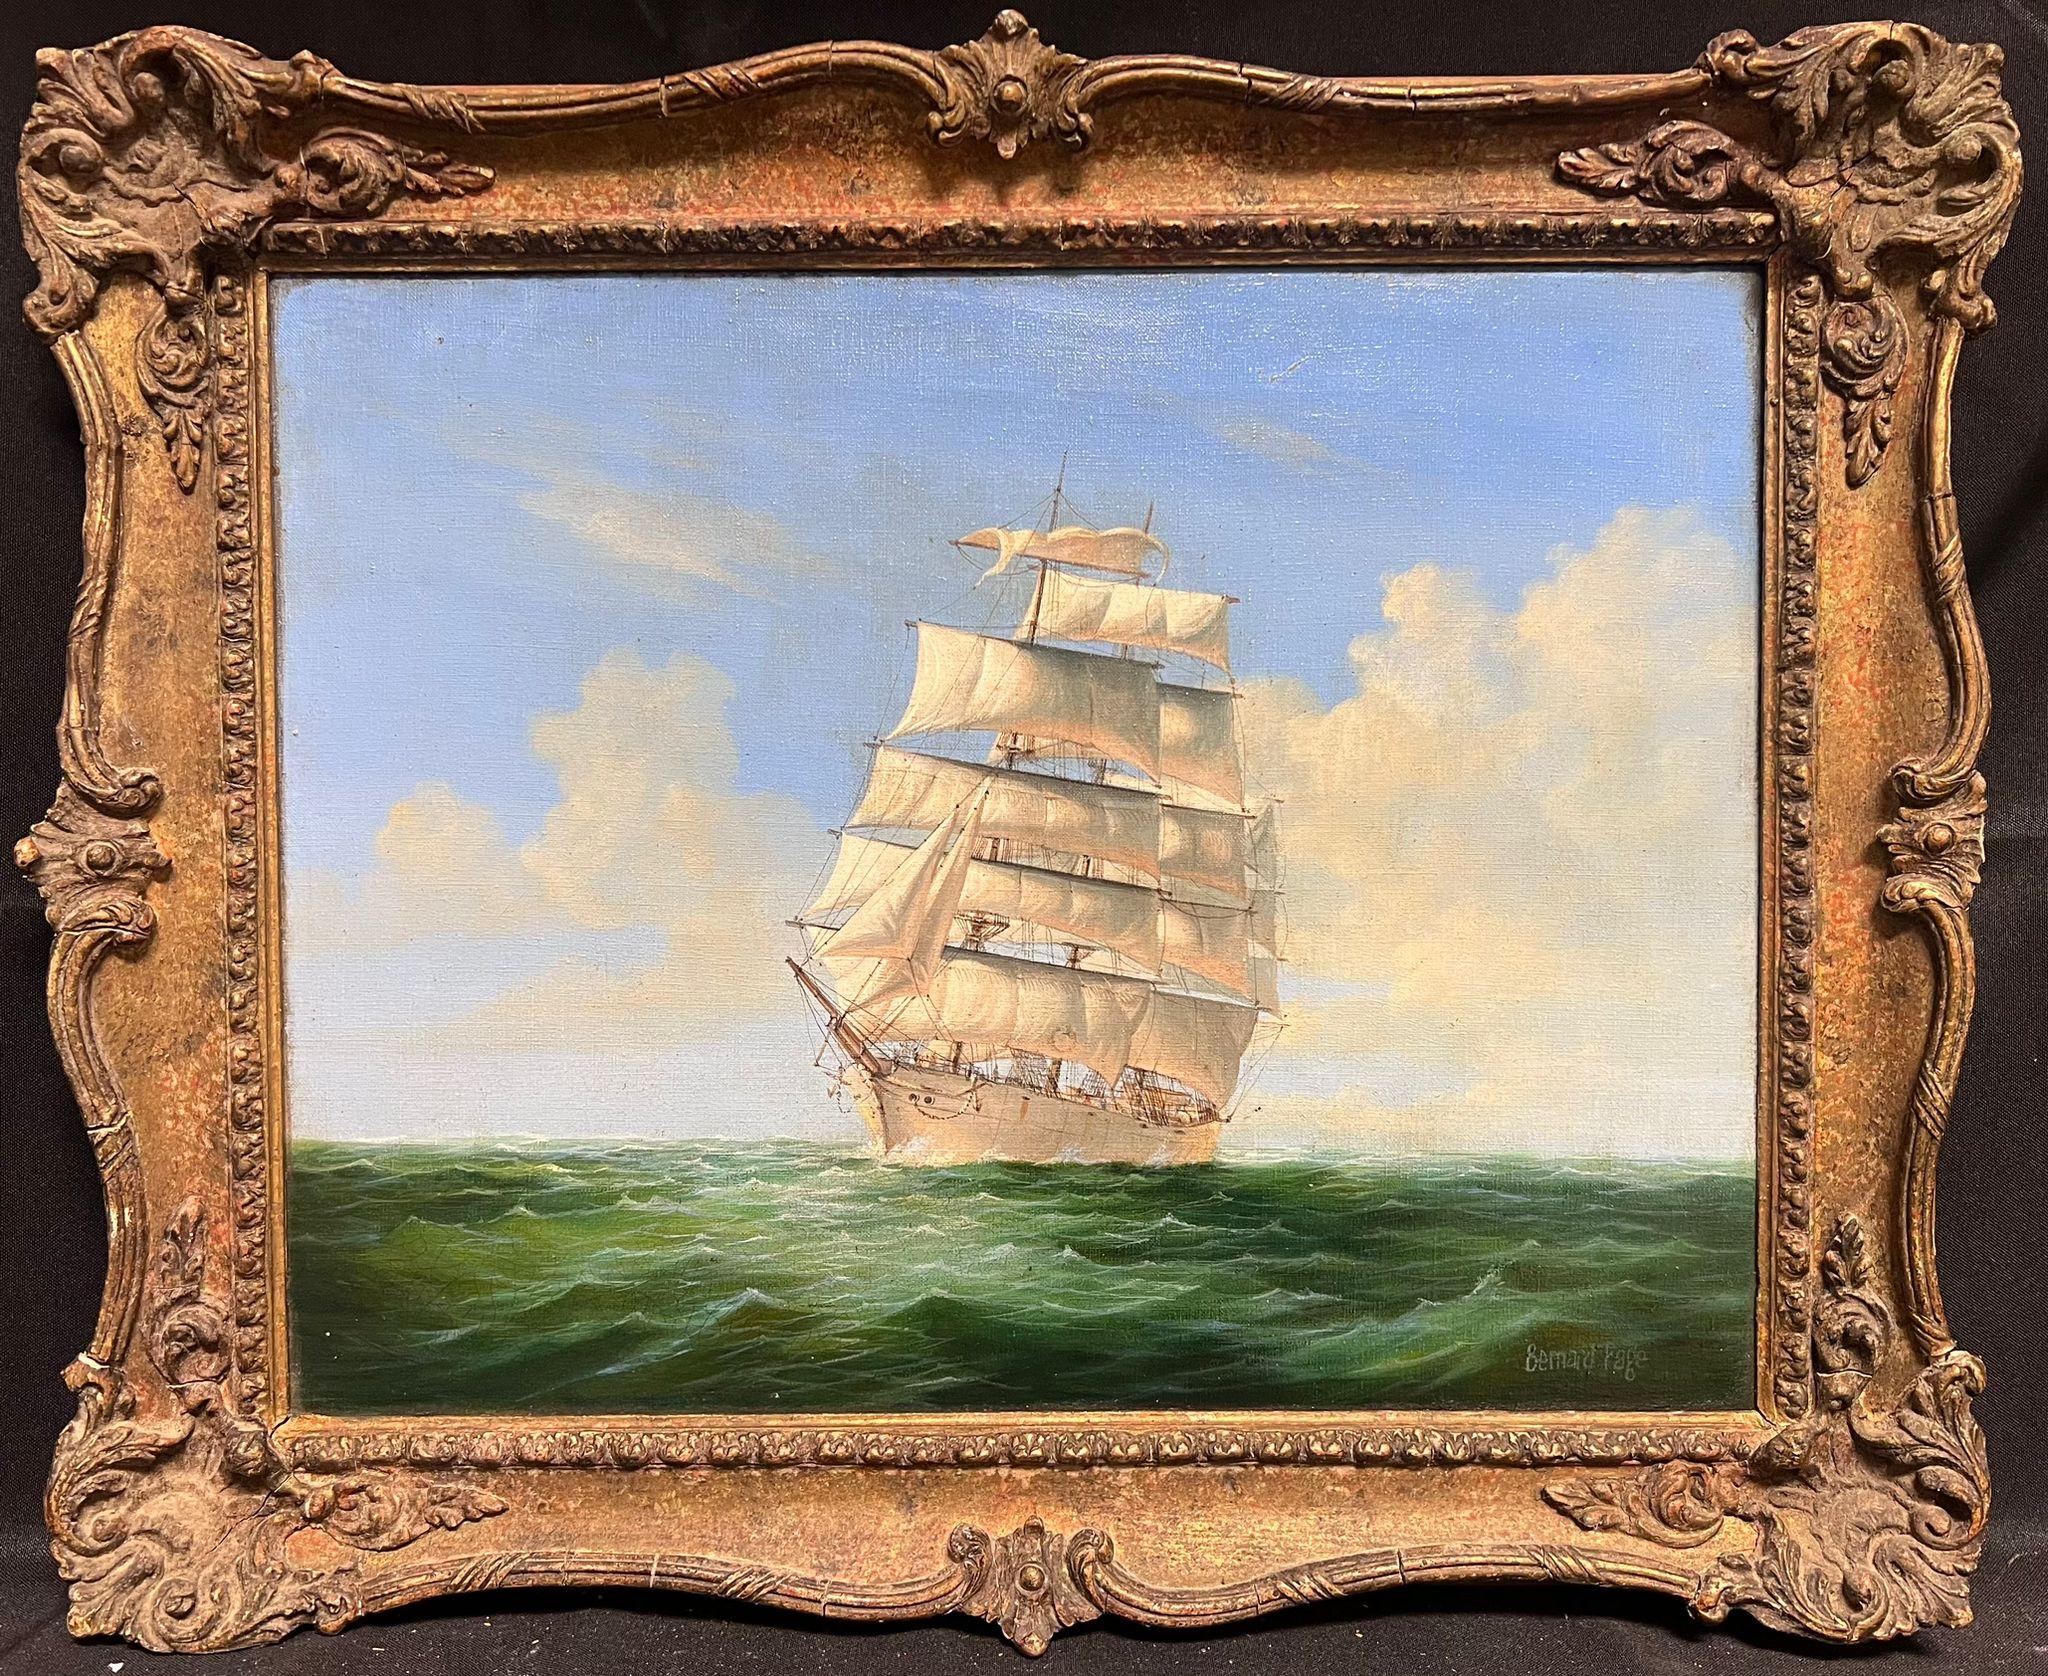 Bernard Page Landscape Painting - Classic Tall Sailing Ship on Turquoise Seas Signed Original British Oil Painting